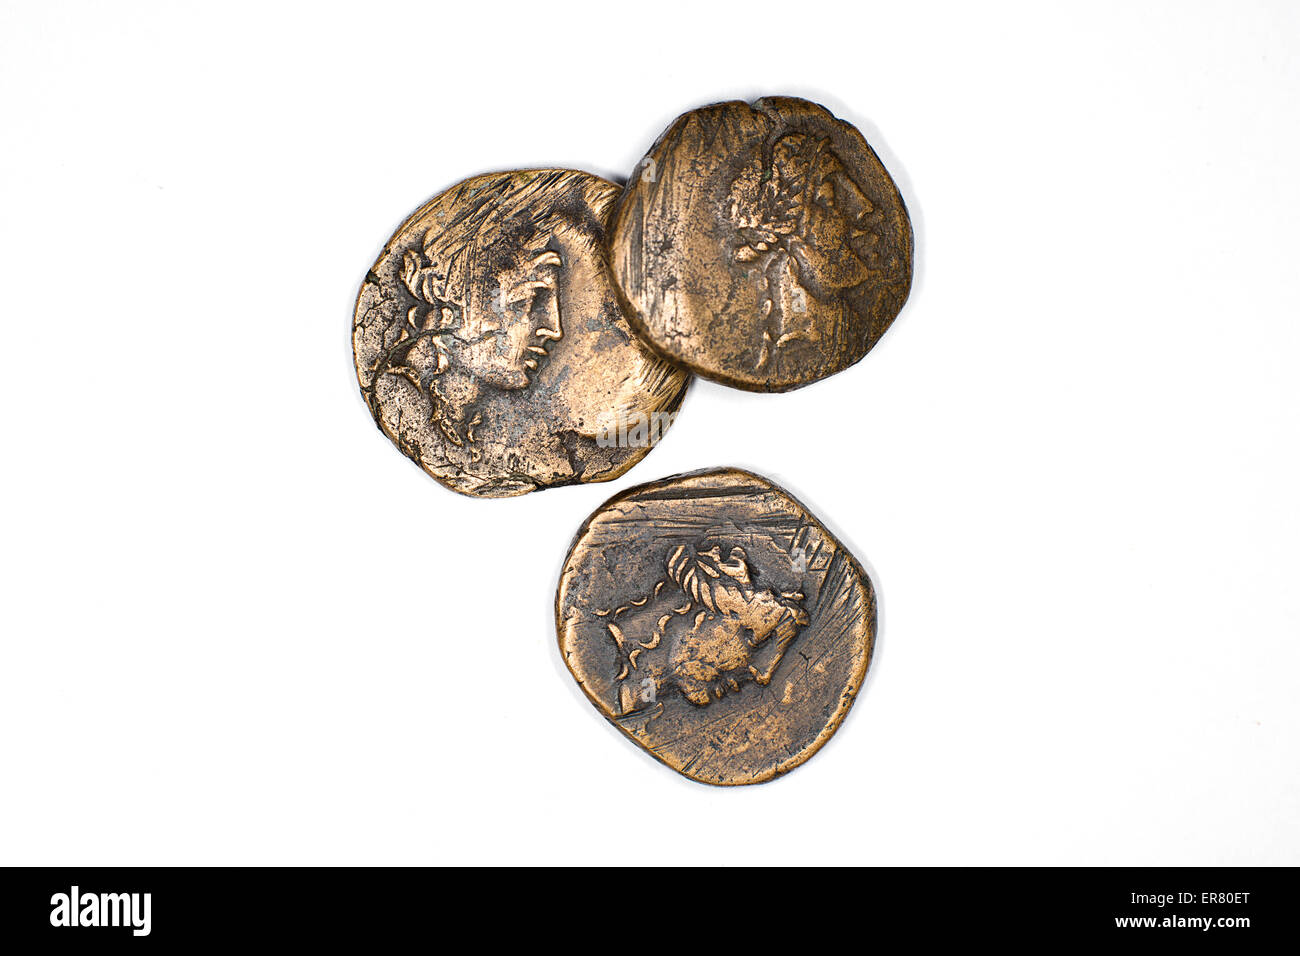 Old bronze coins with portraits of kings on a white background Stock Photo